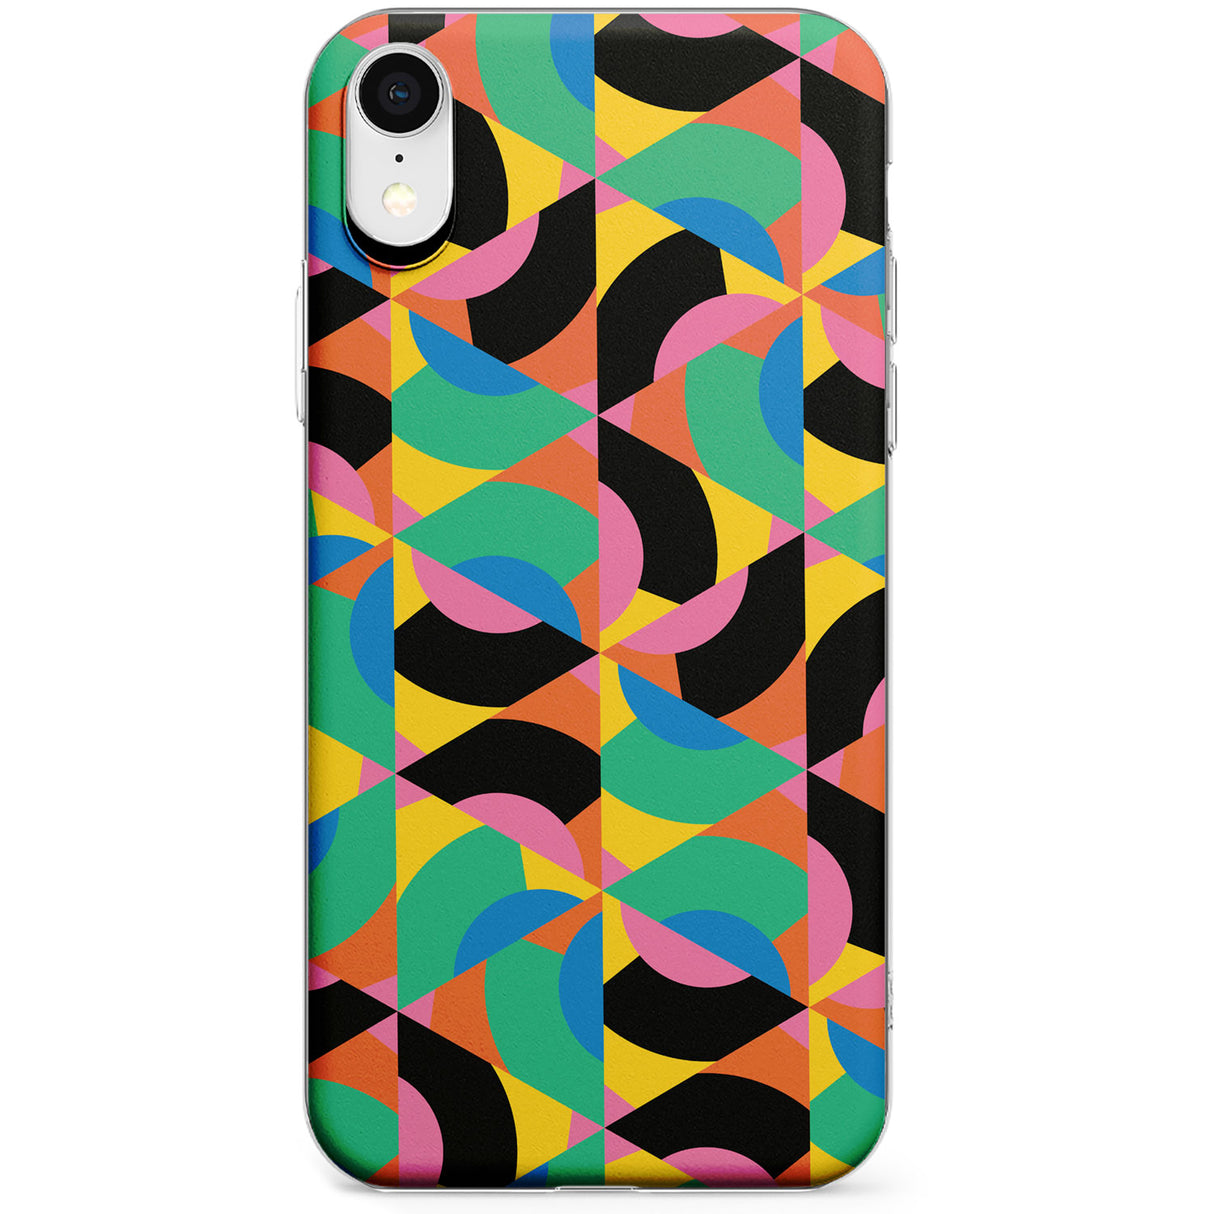 Abstract Carnival Phone Case for iPhone X, XS Max, XR